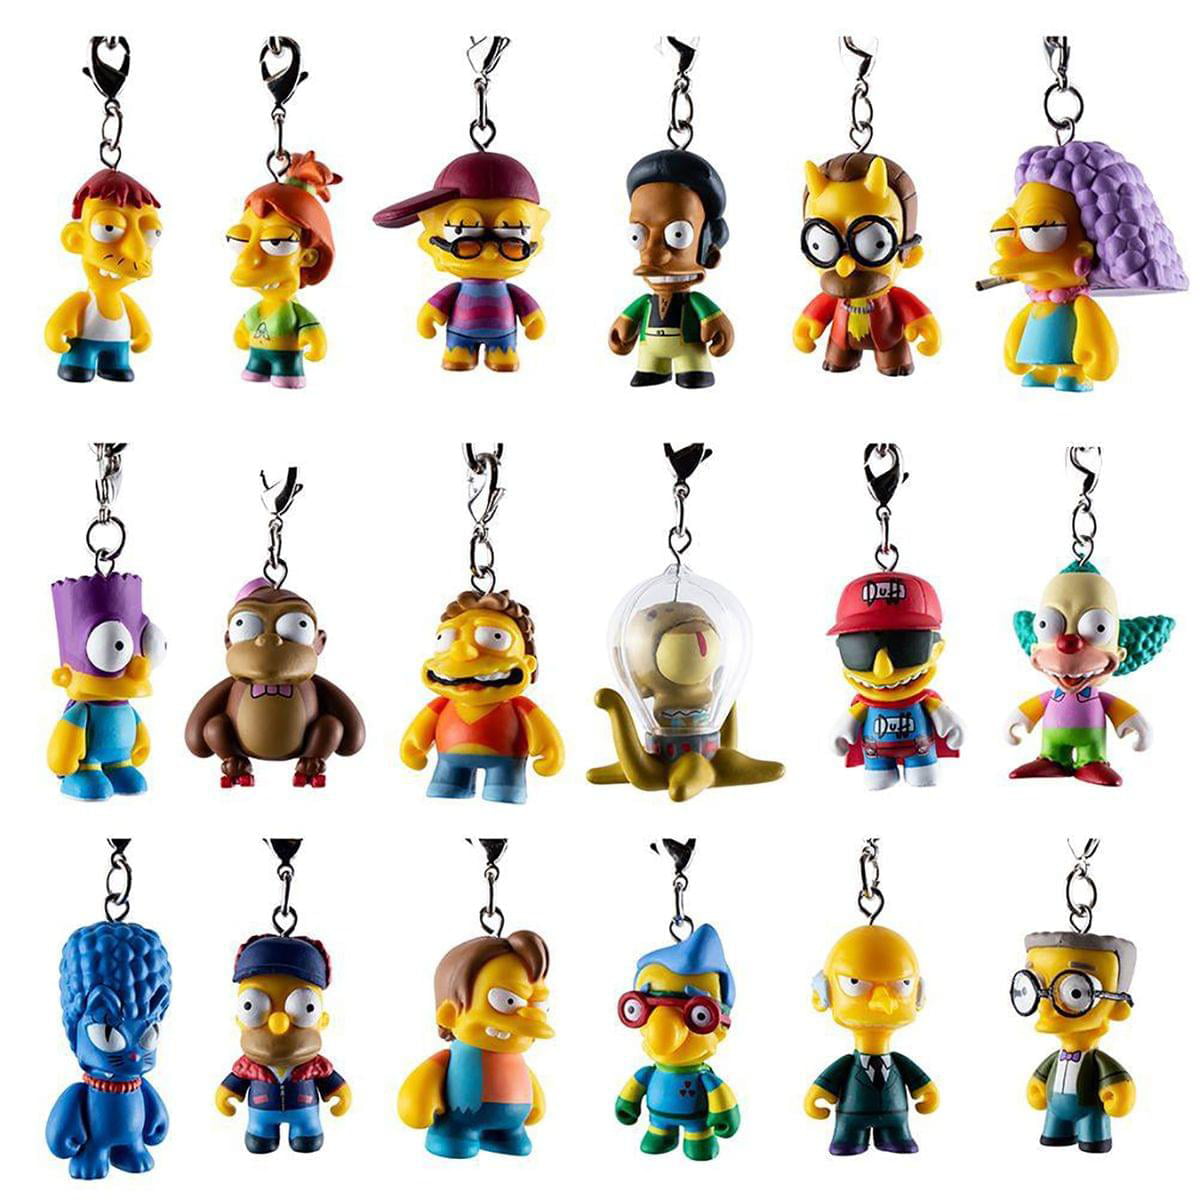 Keyring/Keychain 27793 Duff Beer PVC Soft Touch Key Holder/Cover Details about   The Simpsons 